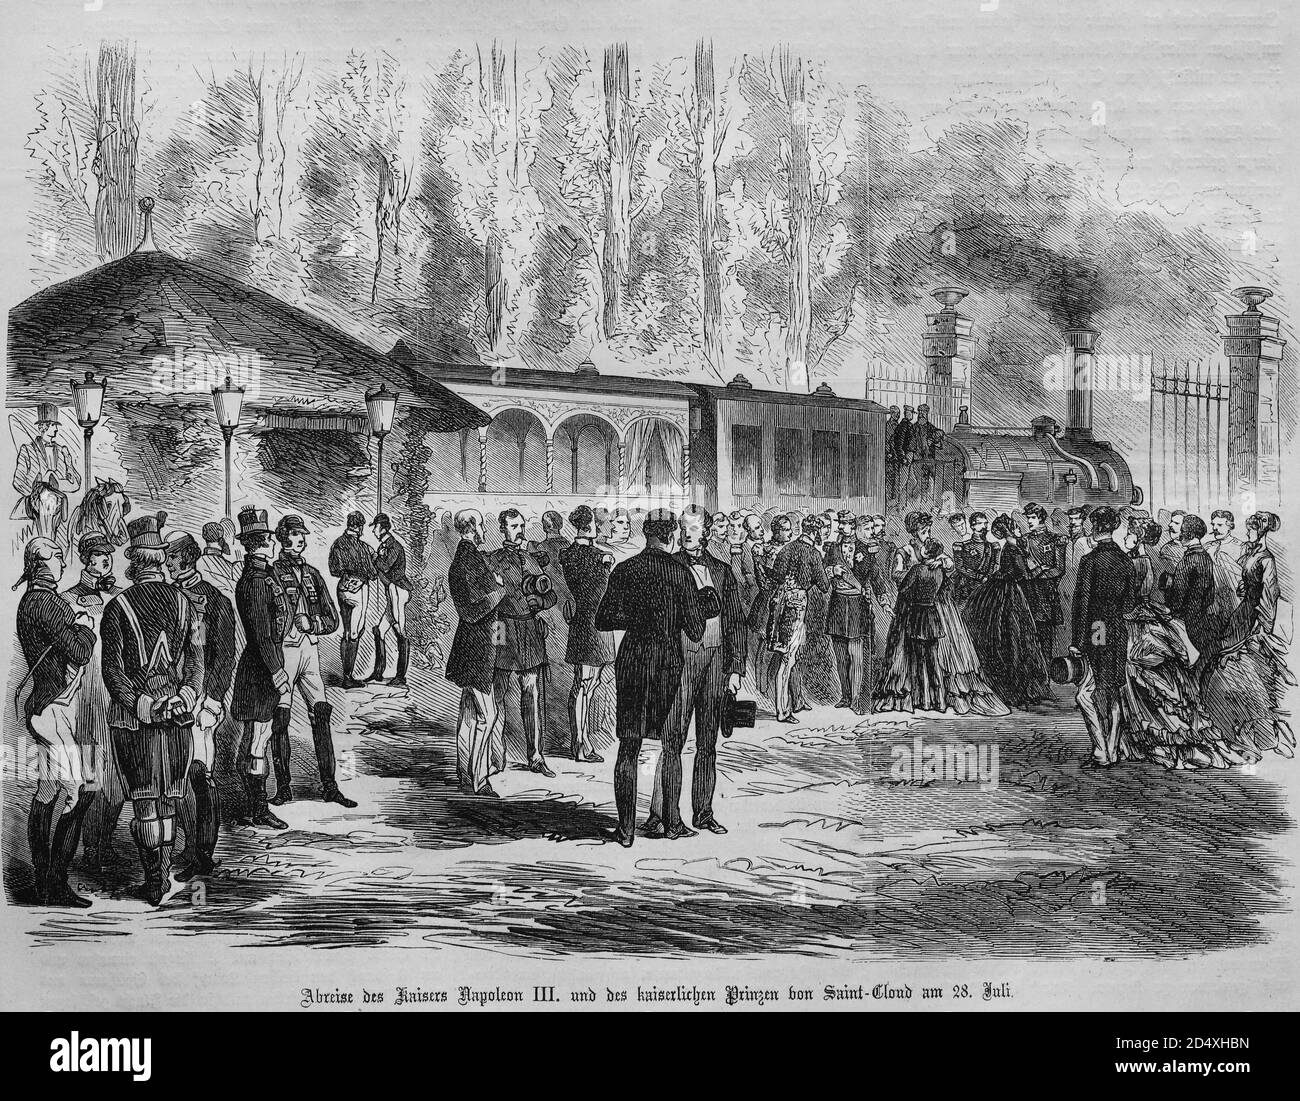 Departure of the emperor Napoleon III and the imperial prince in Saint Cloud on July 28th 1870, illustrated war history, German - French war 1870-1871 Stock Photo